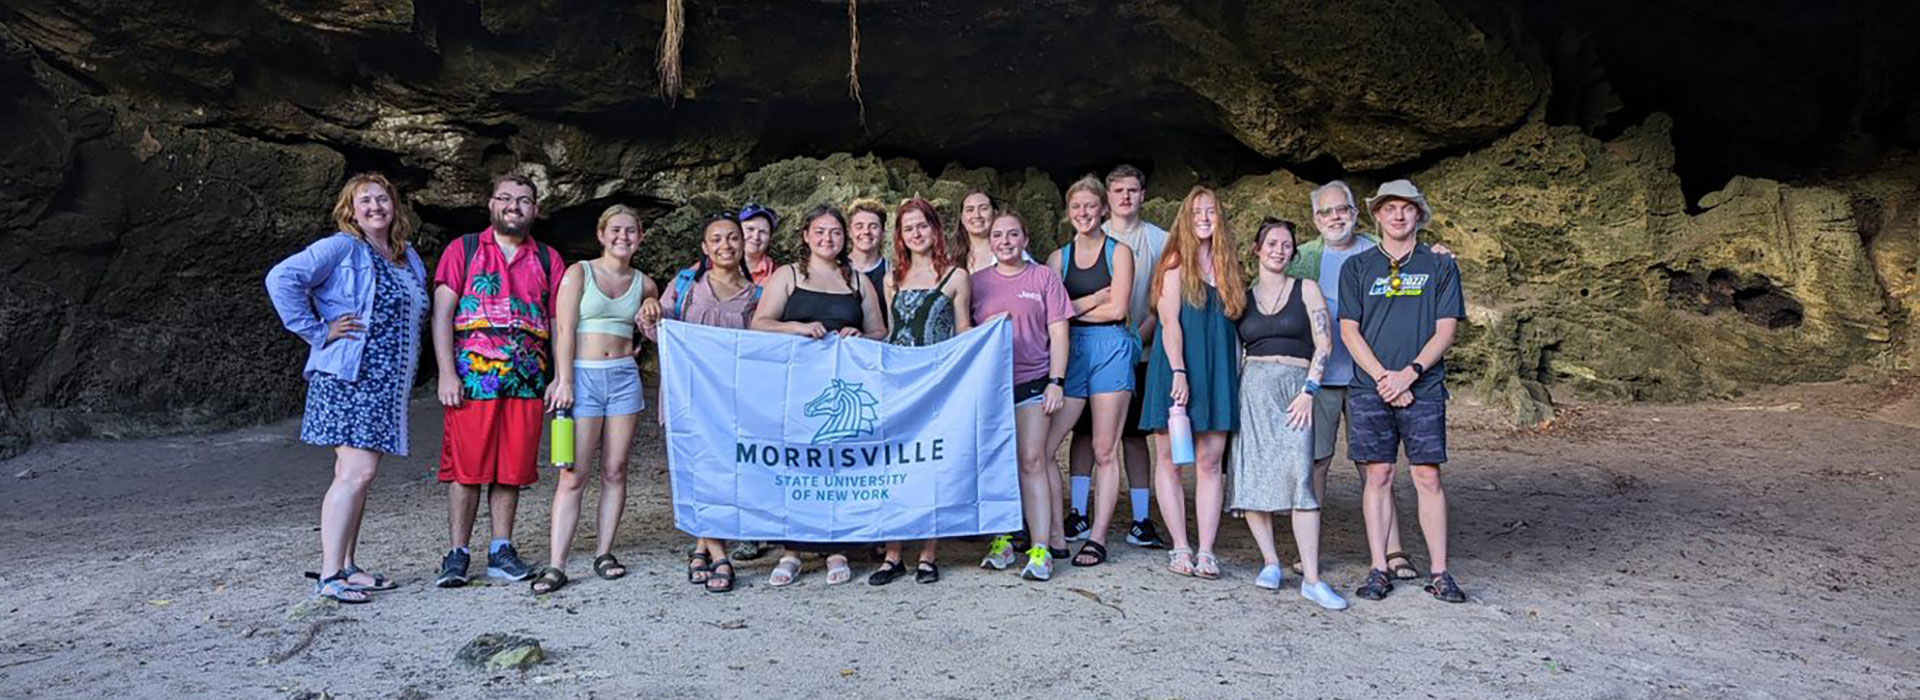 Students and professors pose in the Bahamas with the SUNY Morrisville flag